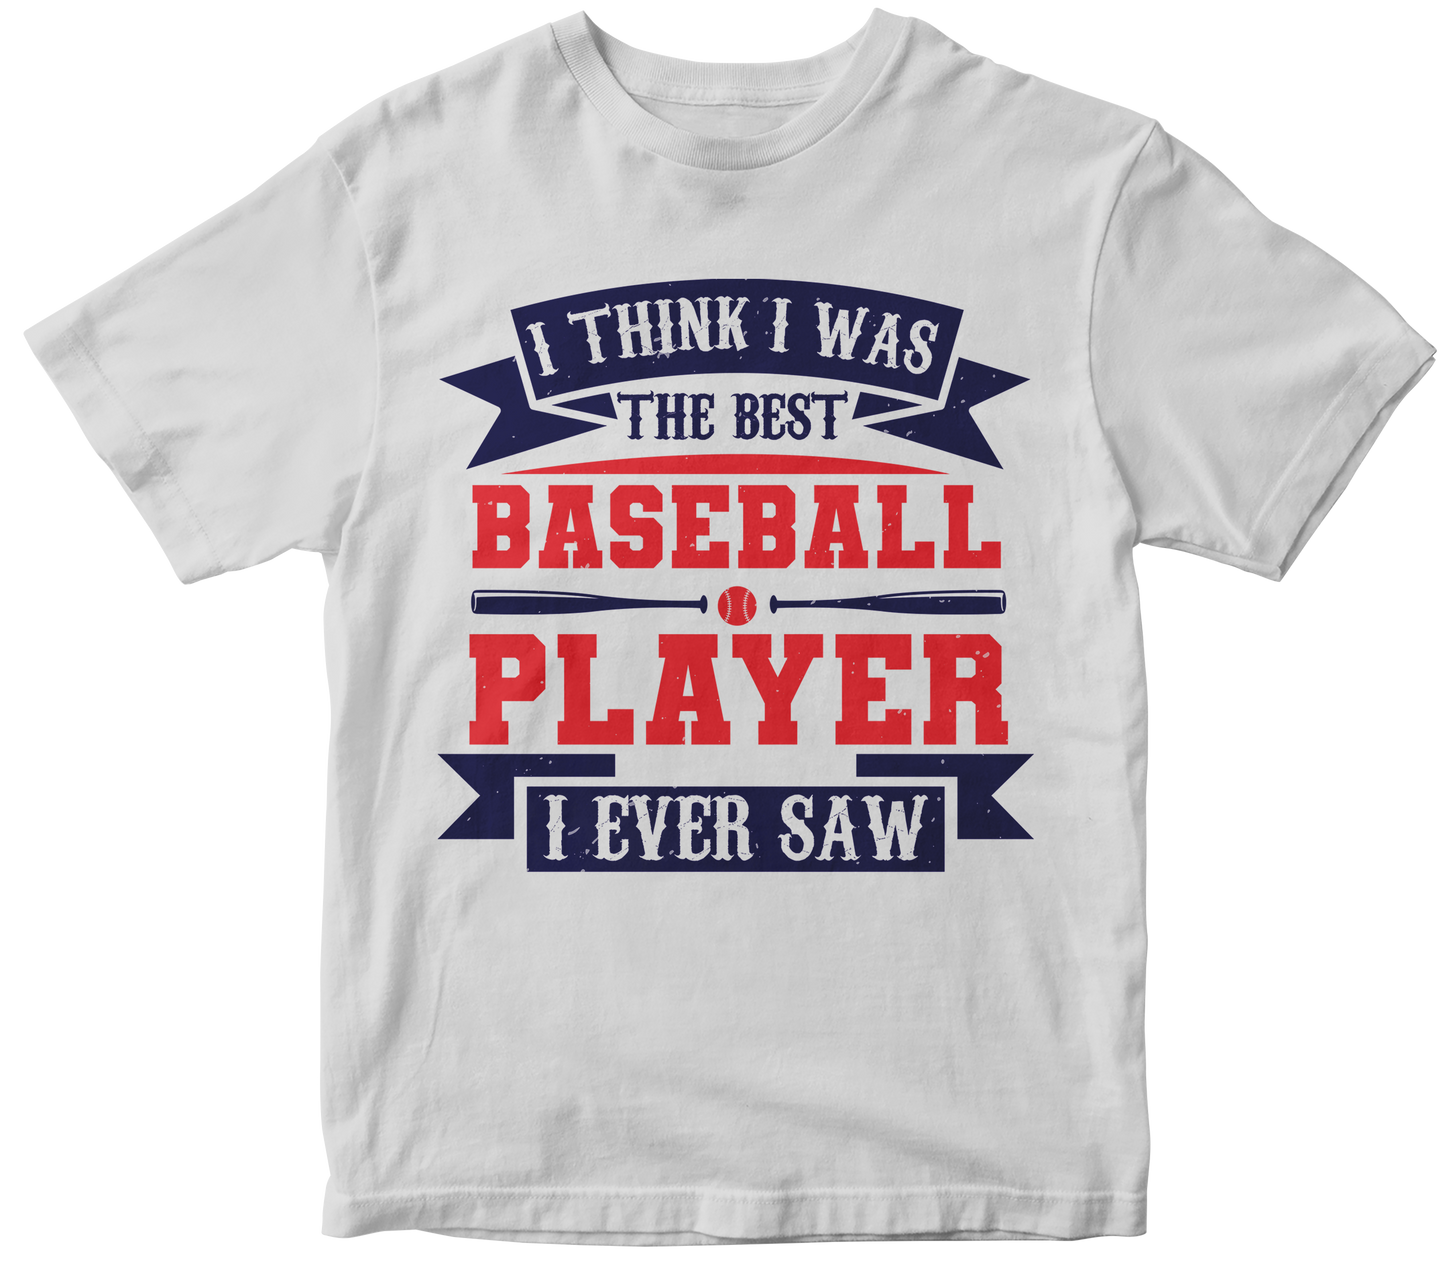 I THINK I WAS THE BEST BASEBALL PLAYER I EVER SAW